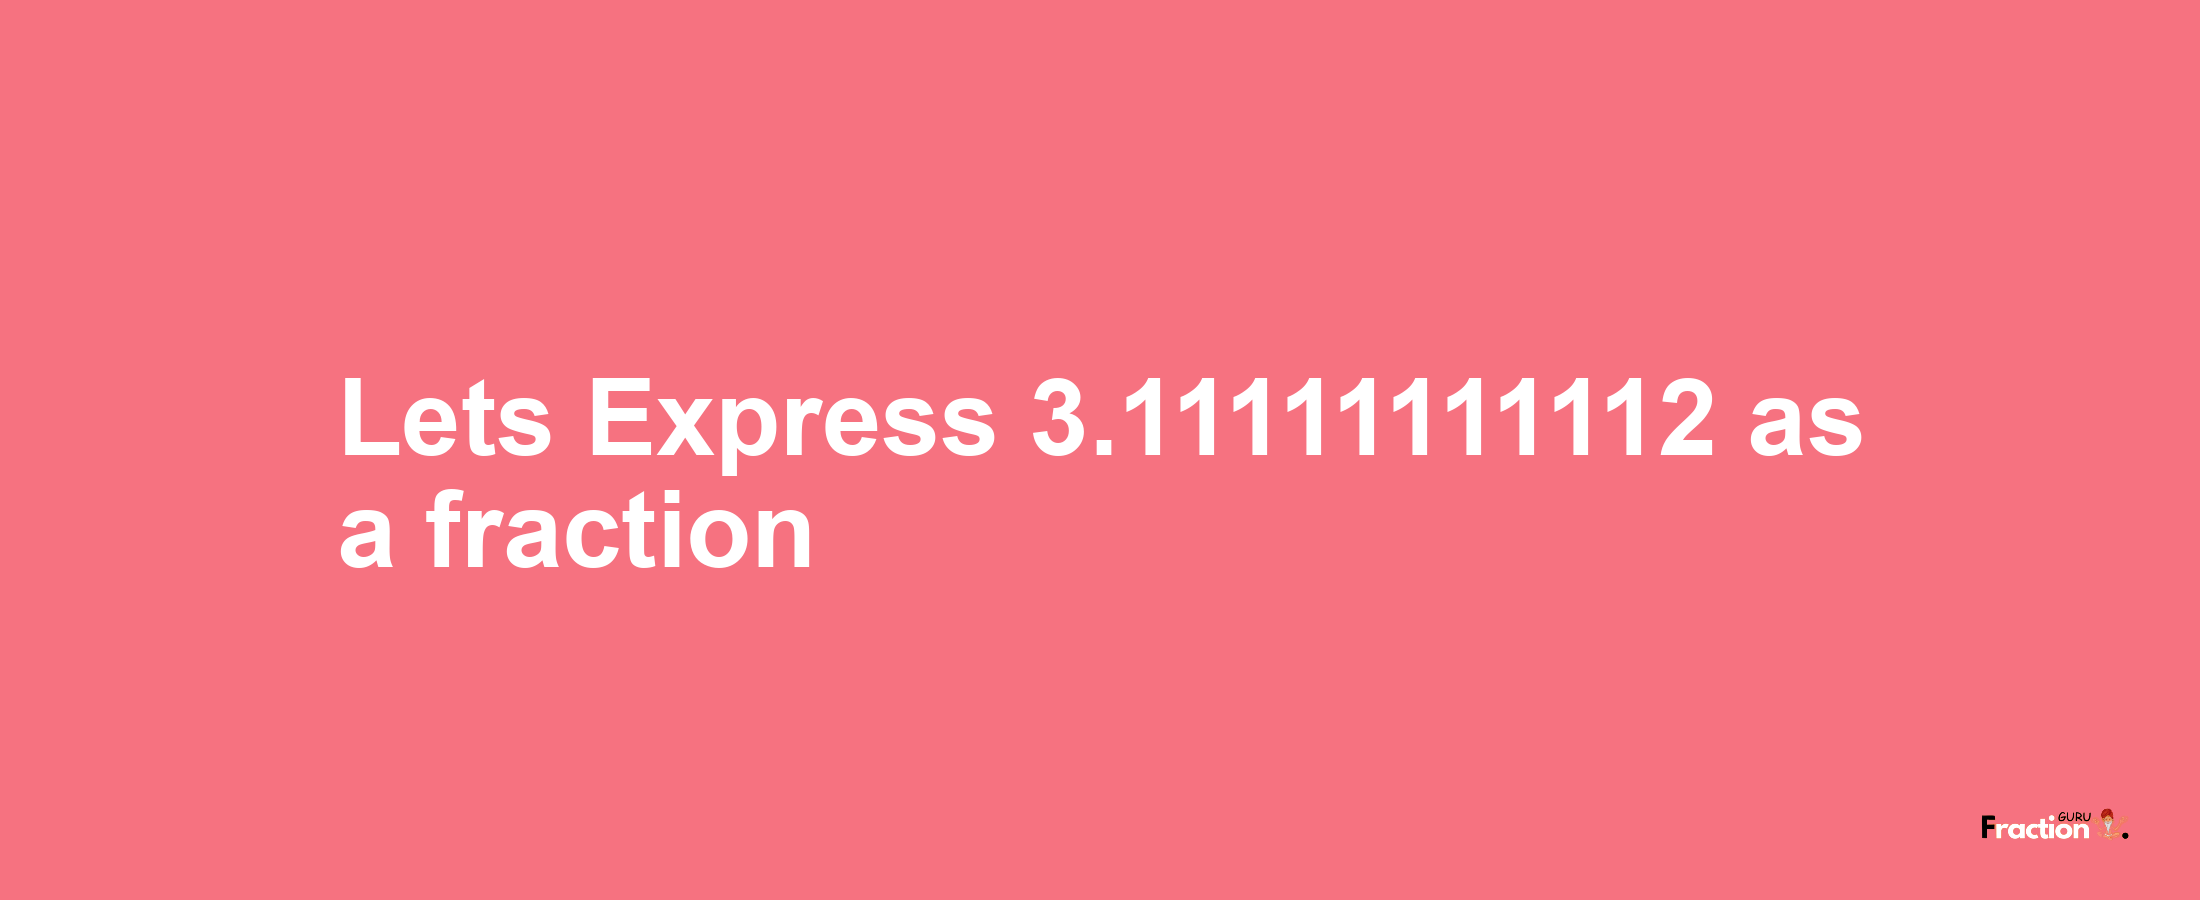 Lets Express 3.11111111112 as afraction